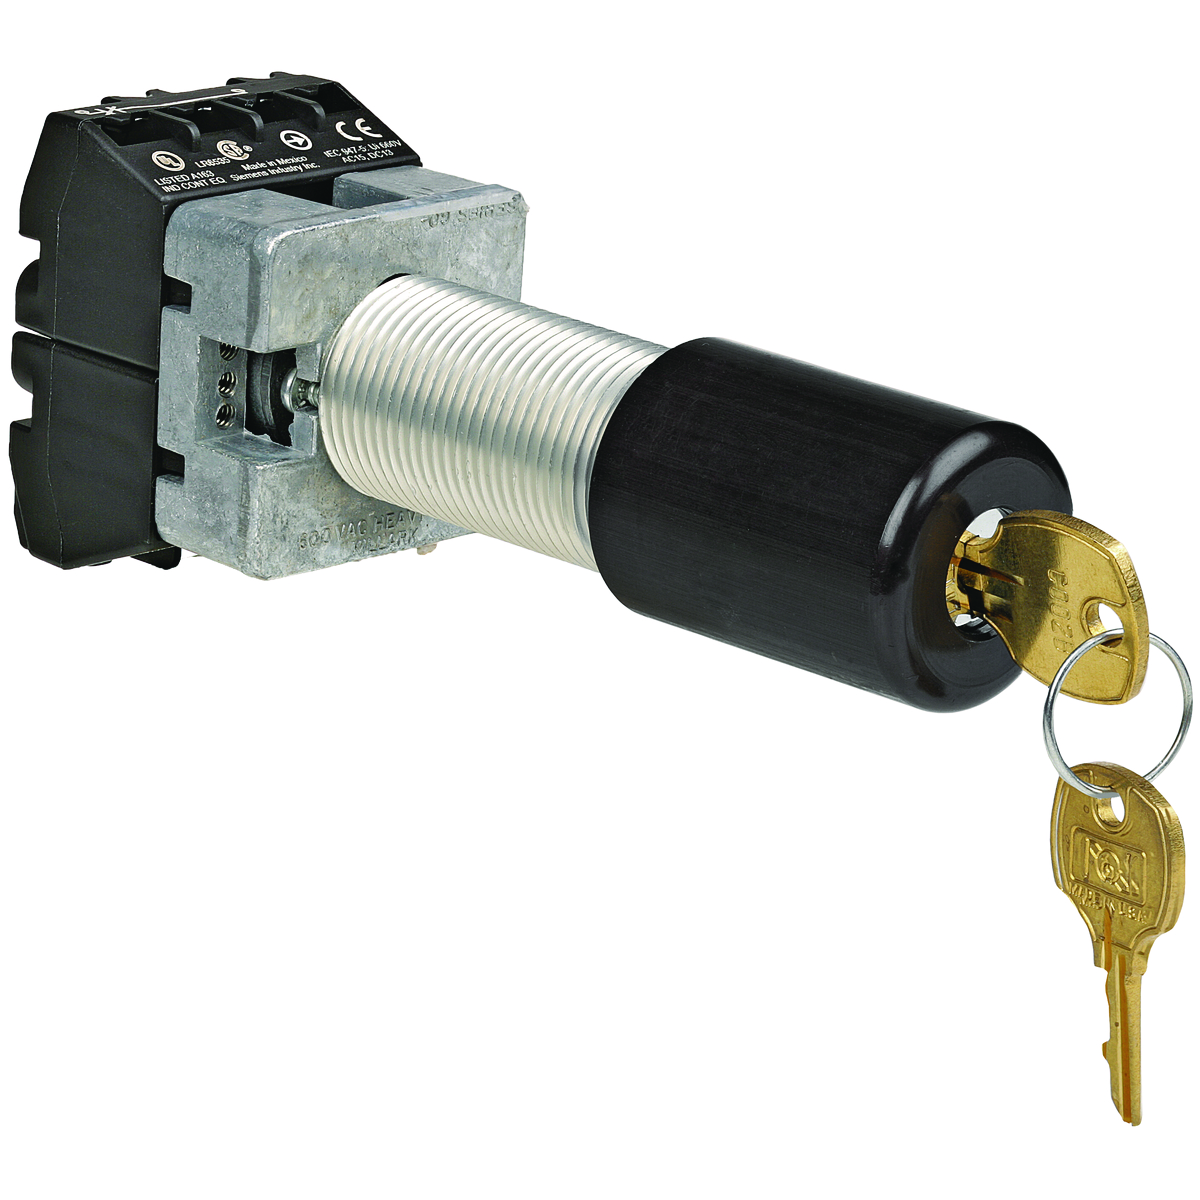 G SERIES - ALUMINUM SHORT MAINTAINED CONTACT 3-POSITION KEYED SELECTORSWITCH OPERATOR - KEYED DIFFERENT WITH KEY REMOVAL IN ALL THREEPOSITIONS - 